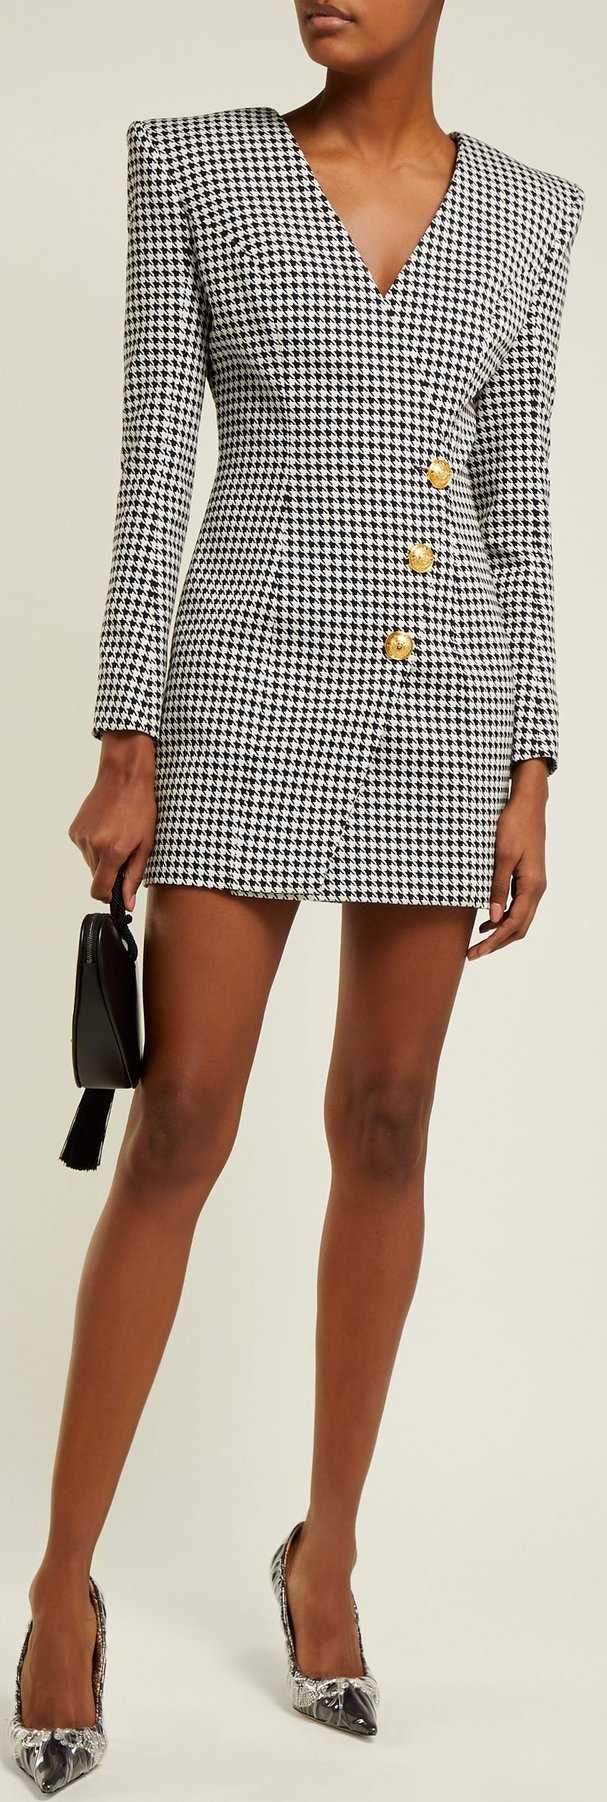 Houndstooth Buttoned Mini Dress | DESIGNER INSPIRED FASHIONS